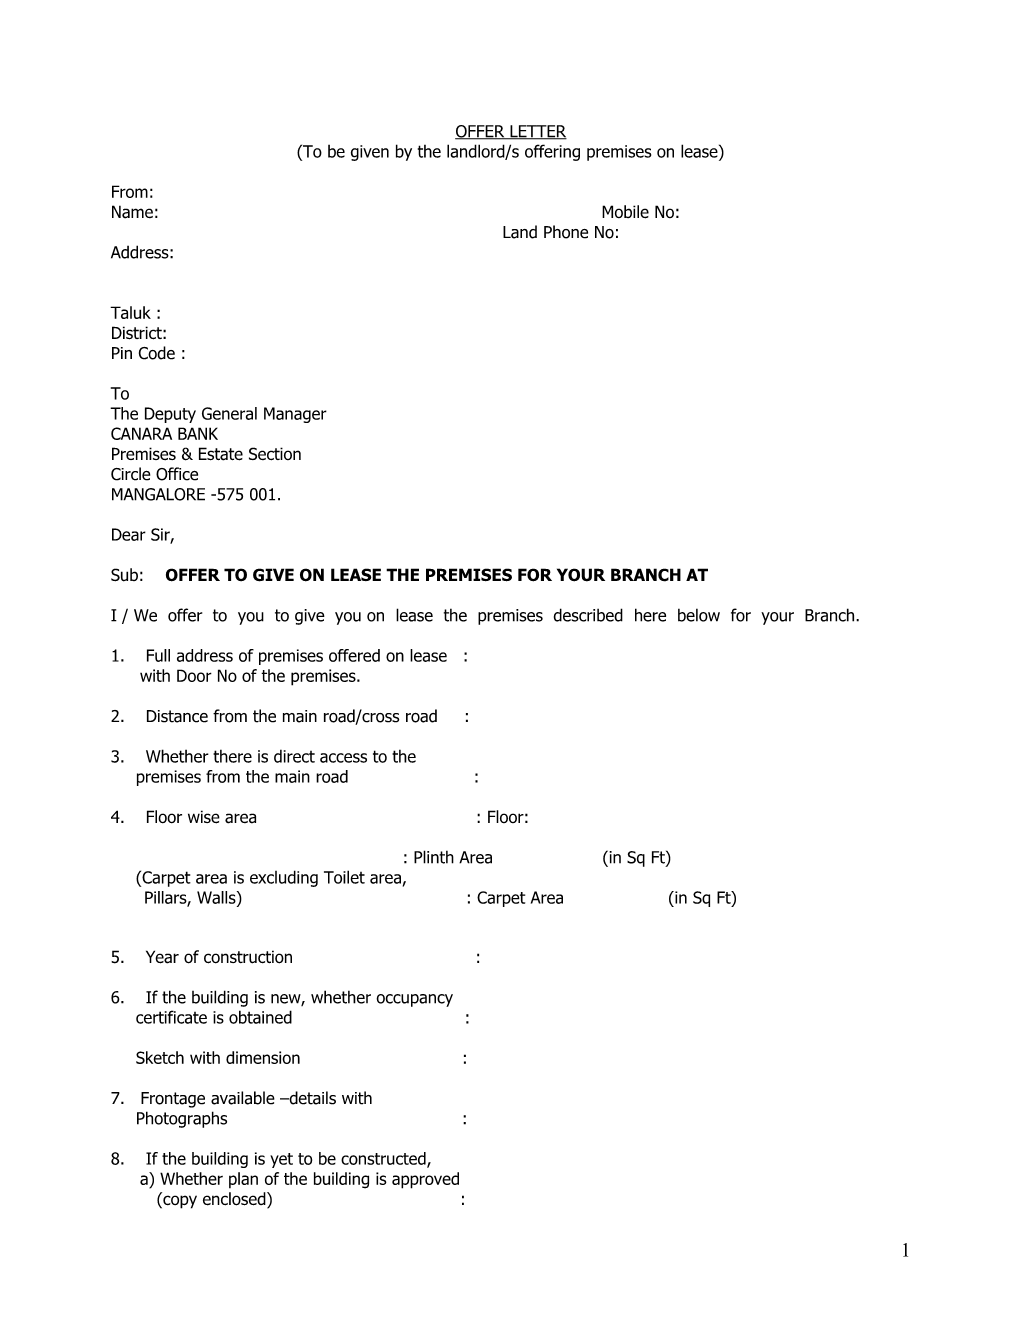 Offer Letter to Be Given by the Landlord(S) Offering Premises on Lease